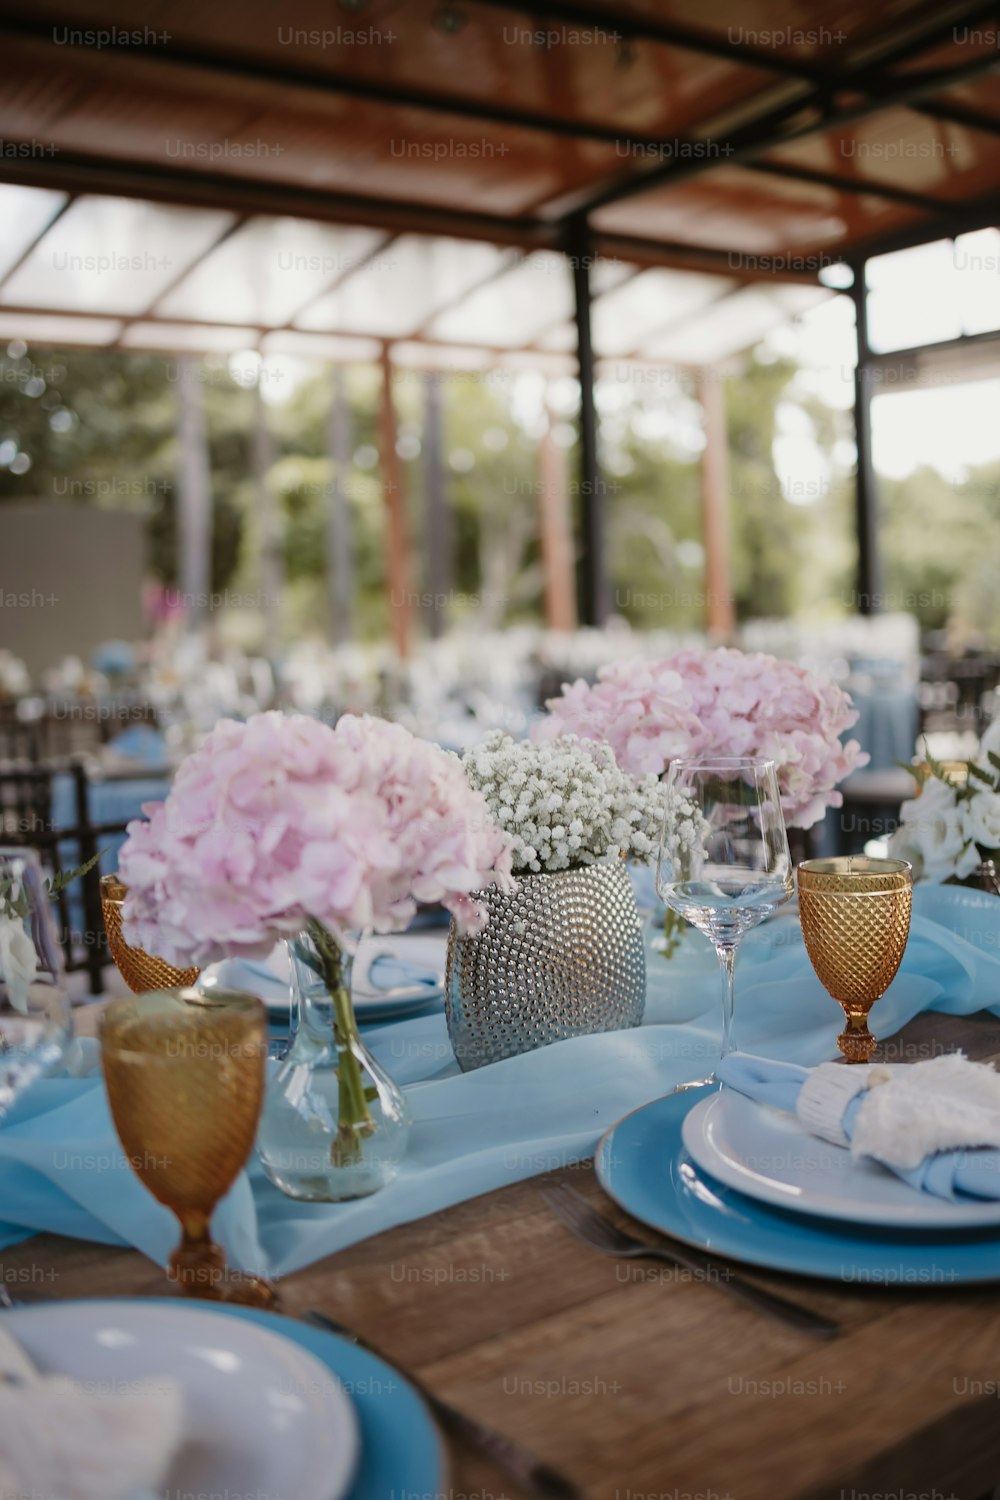 a table set with blue and white plates and flowers